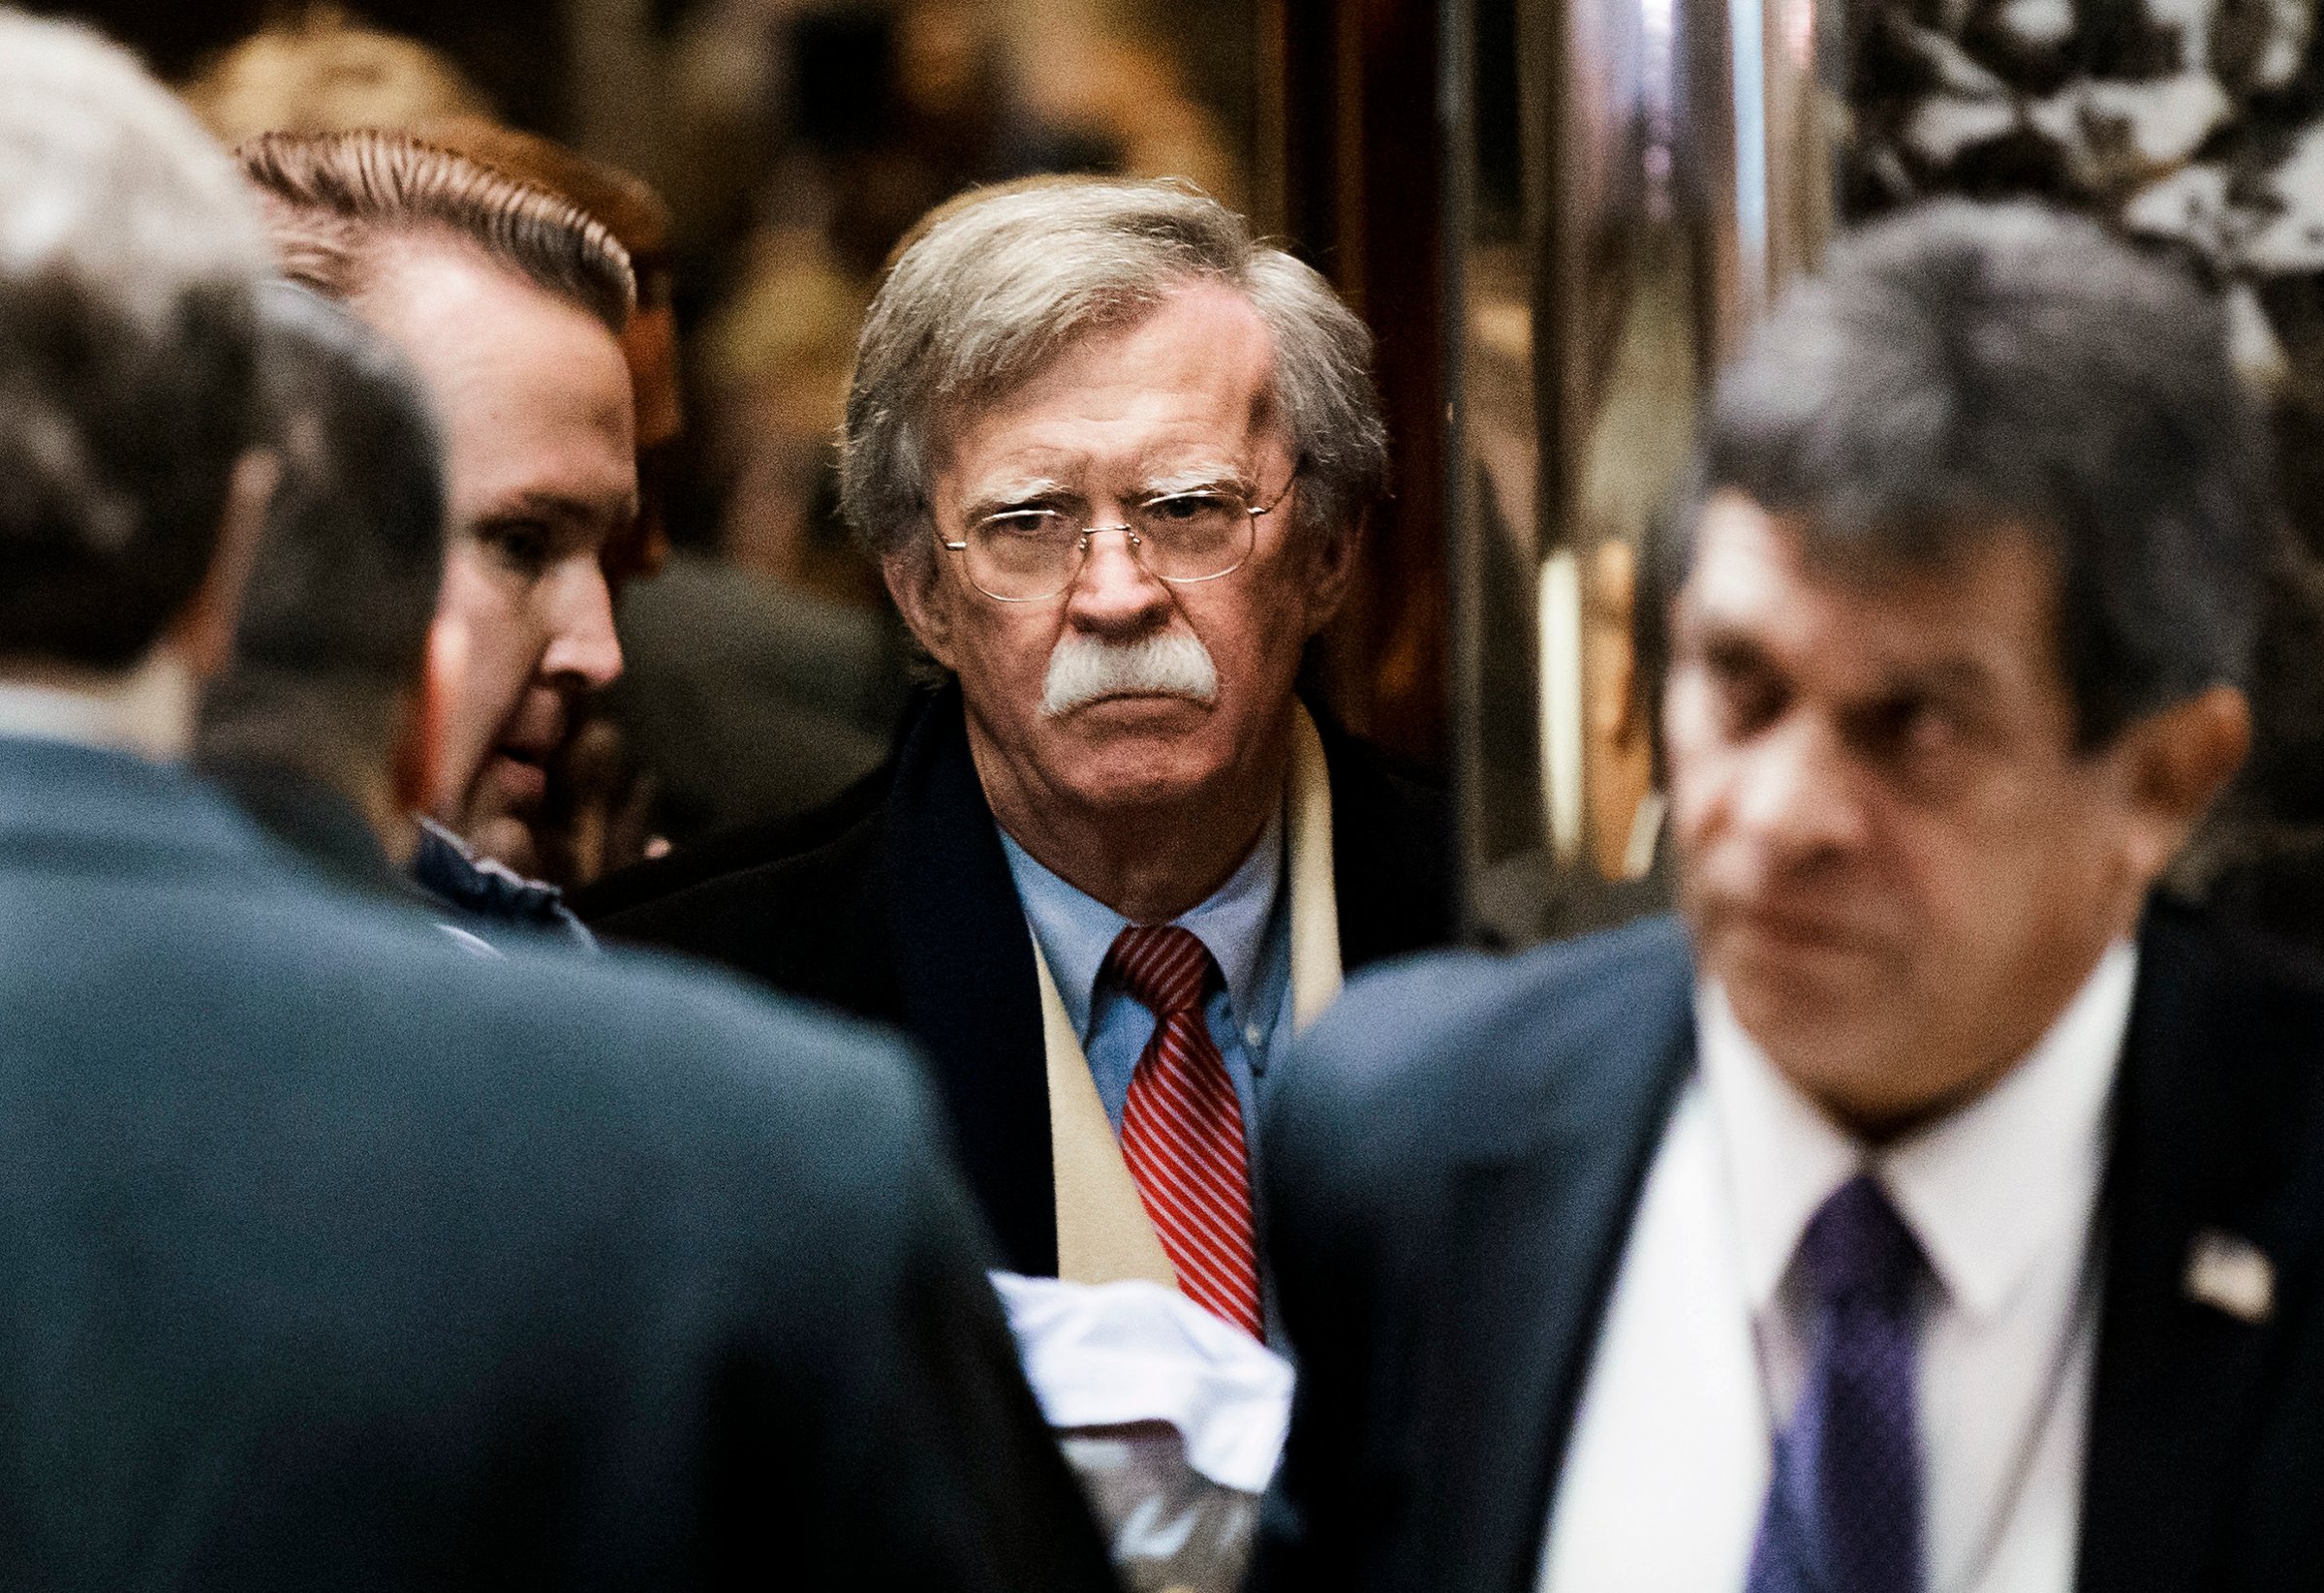 John Bolton Becomes New National Security Advisor Political And Business Visitors At Trump Tower During President-Elect's Transition To The White House